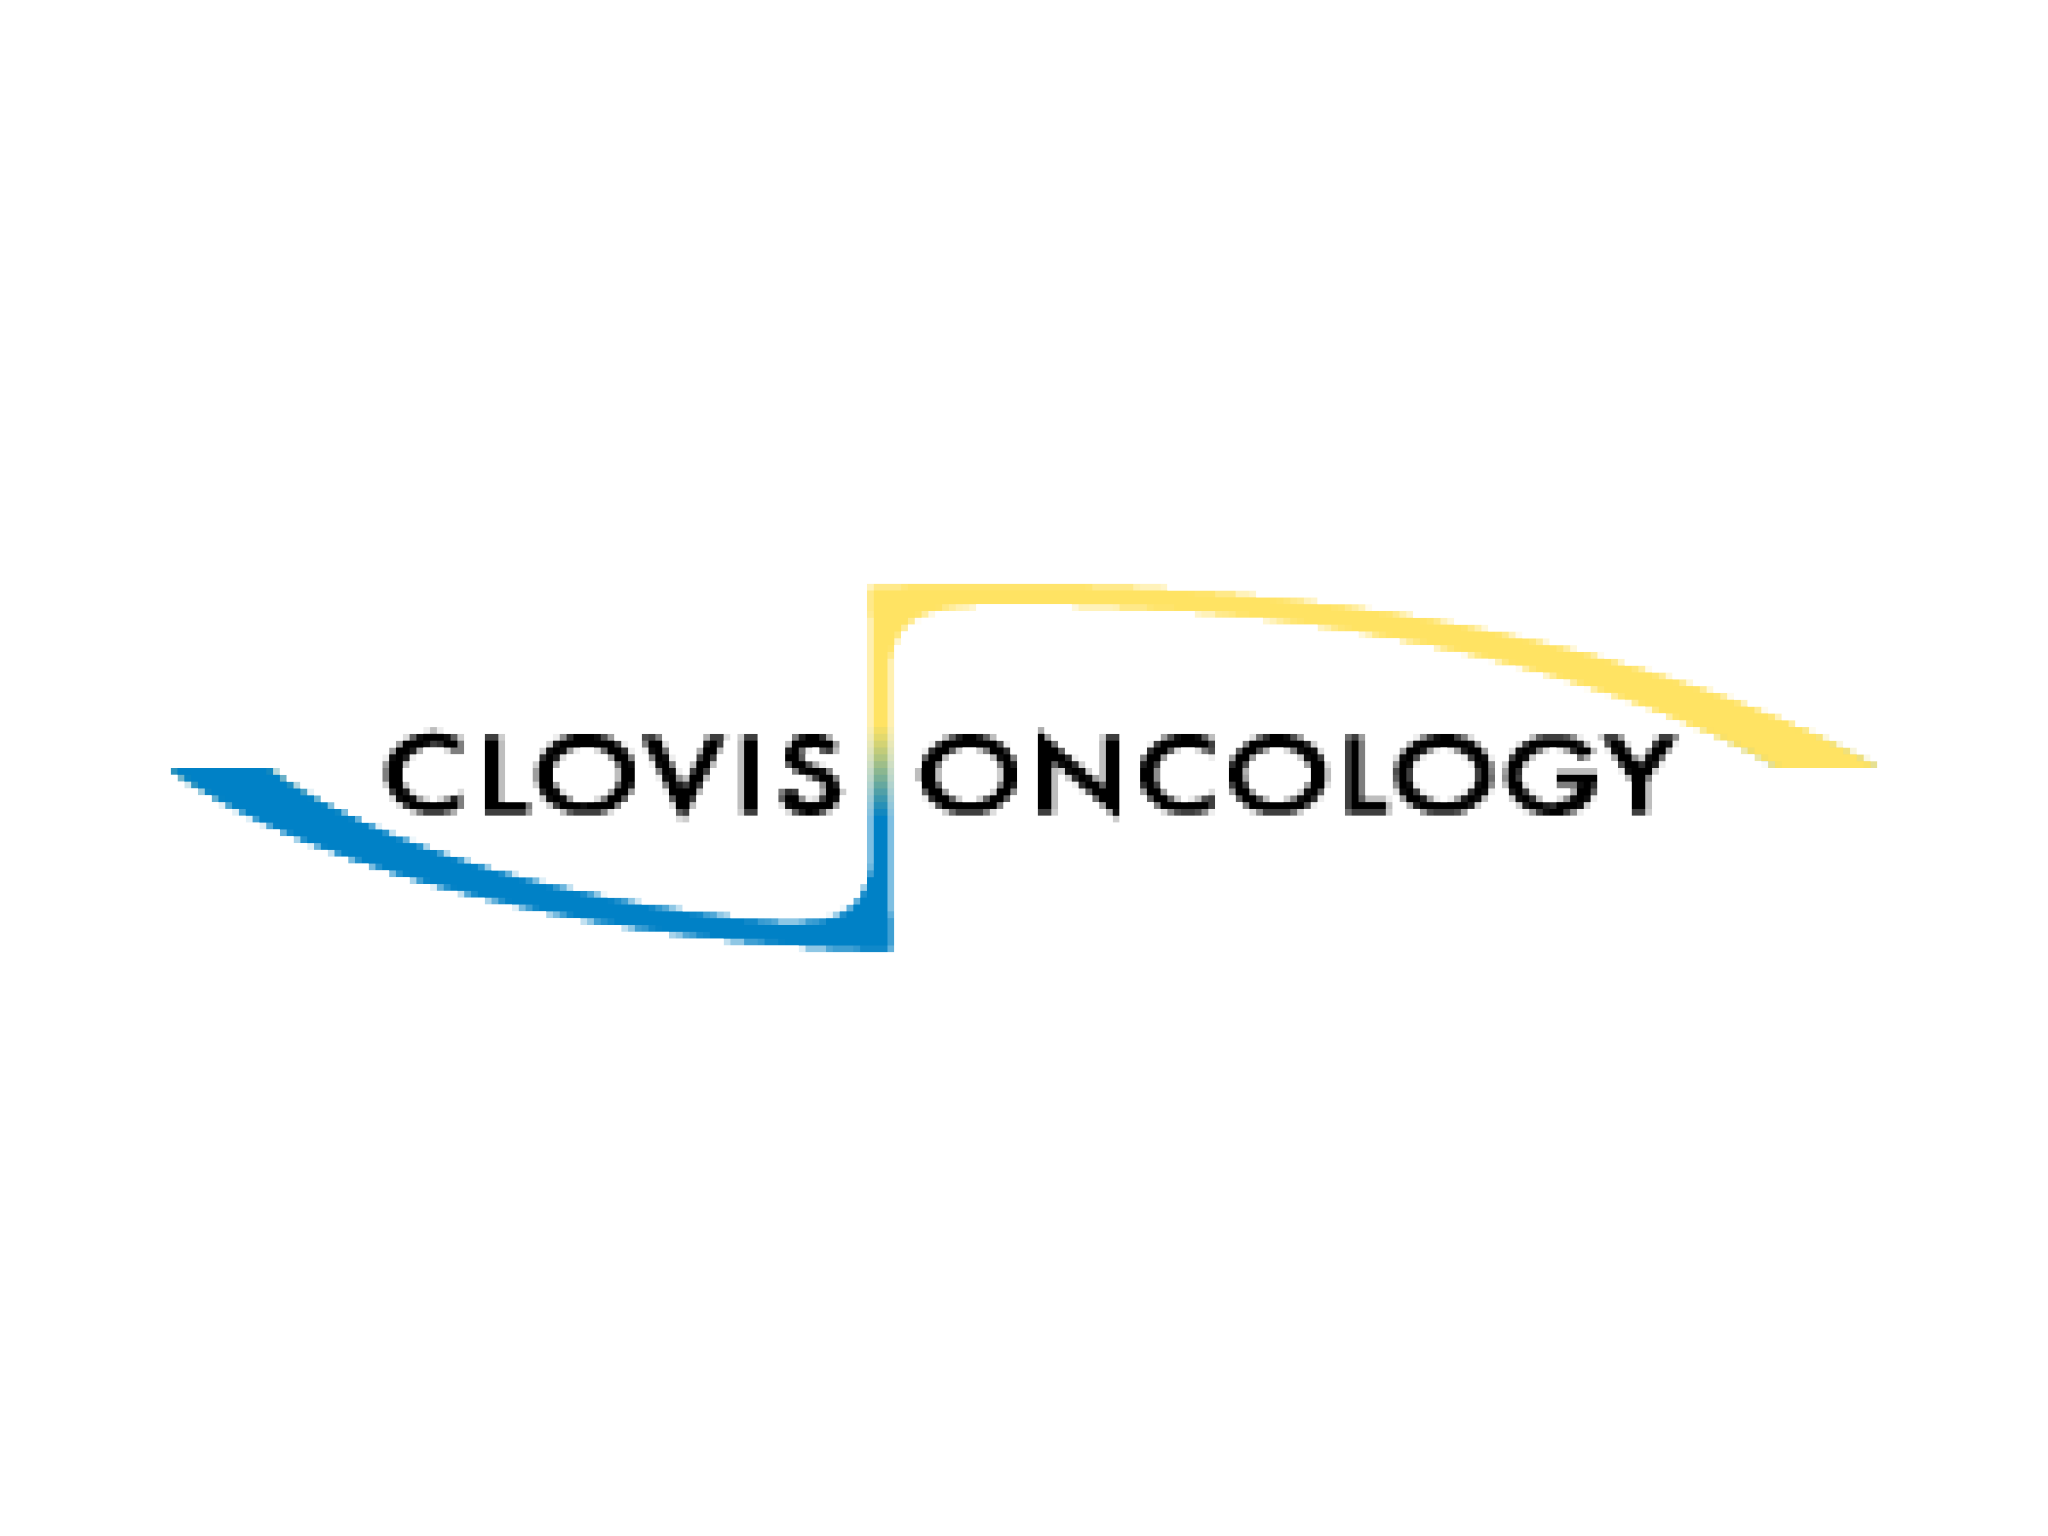  cancer-focused-clovis-oncology-files-for-bankruptcy 